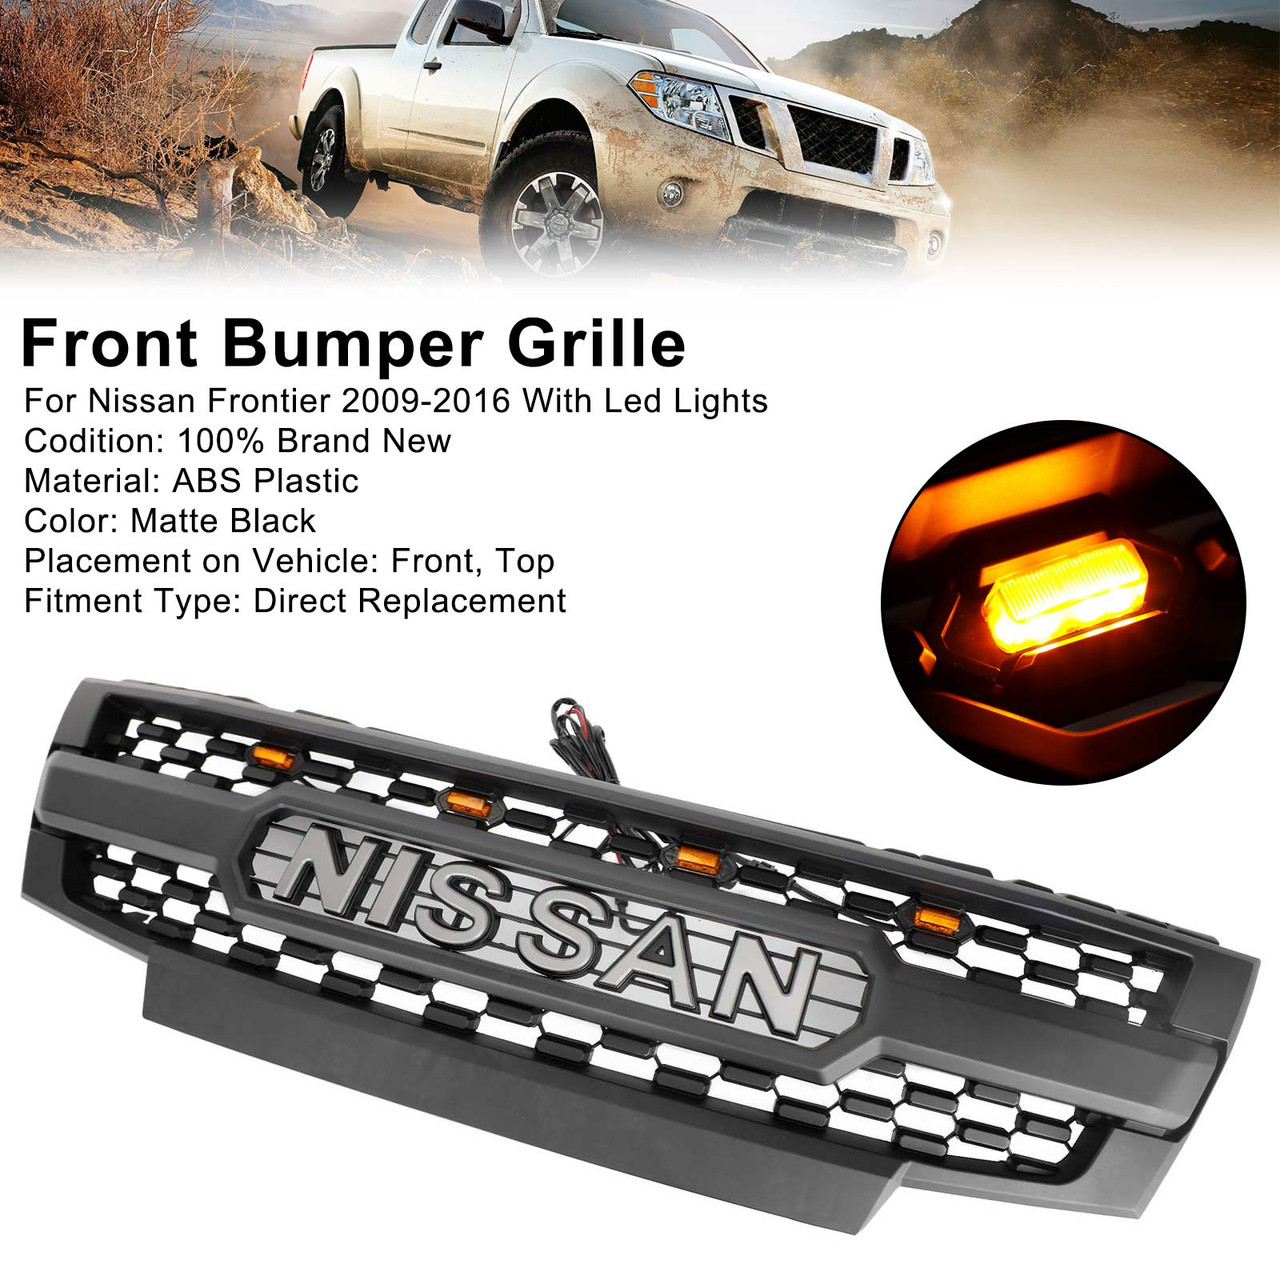 09-19 Nissan Frontier Front Bumper Grille Grill W/ Led Lights